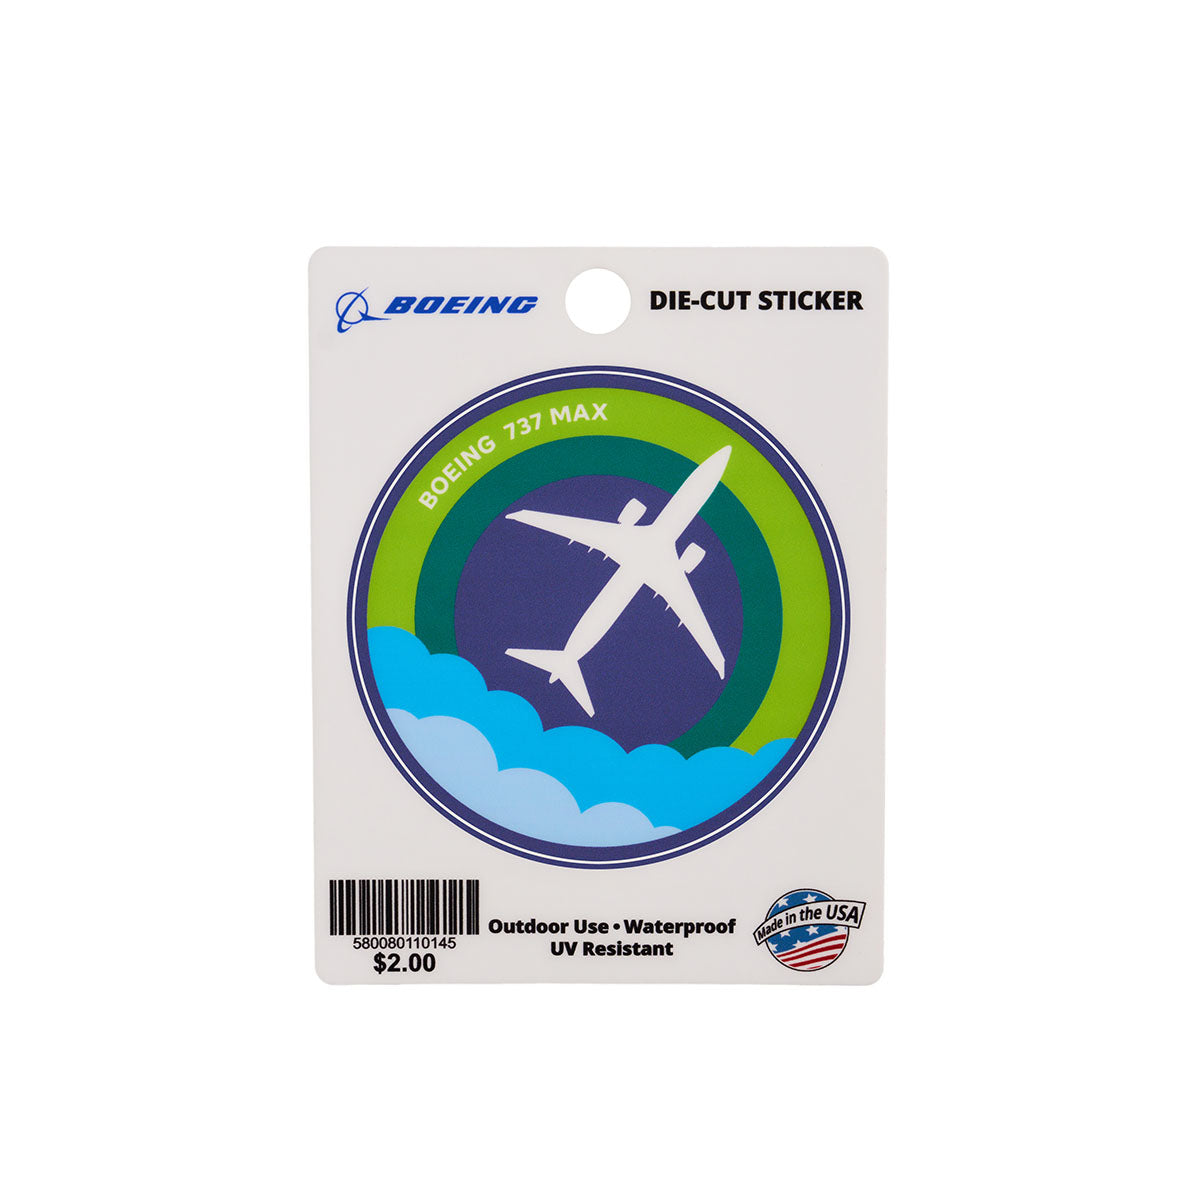  Skyward sticker, featuring the iconic Boeing Boeing 737 MAX in a roundel design. 